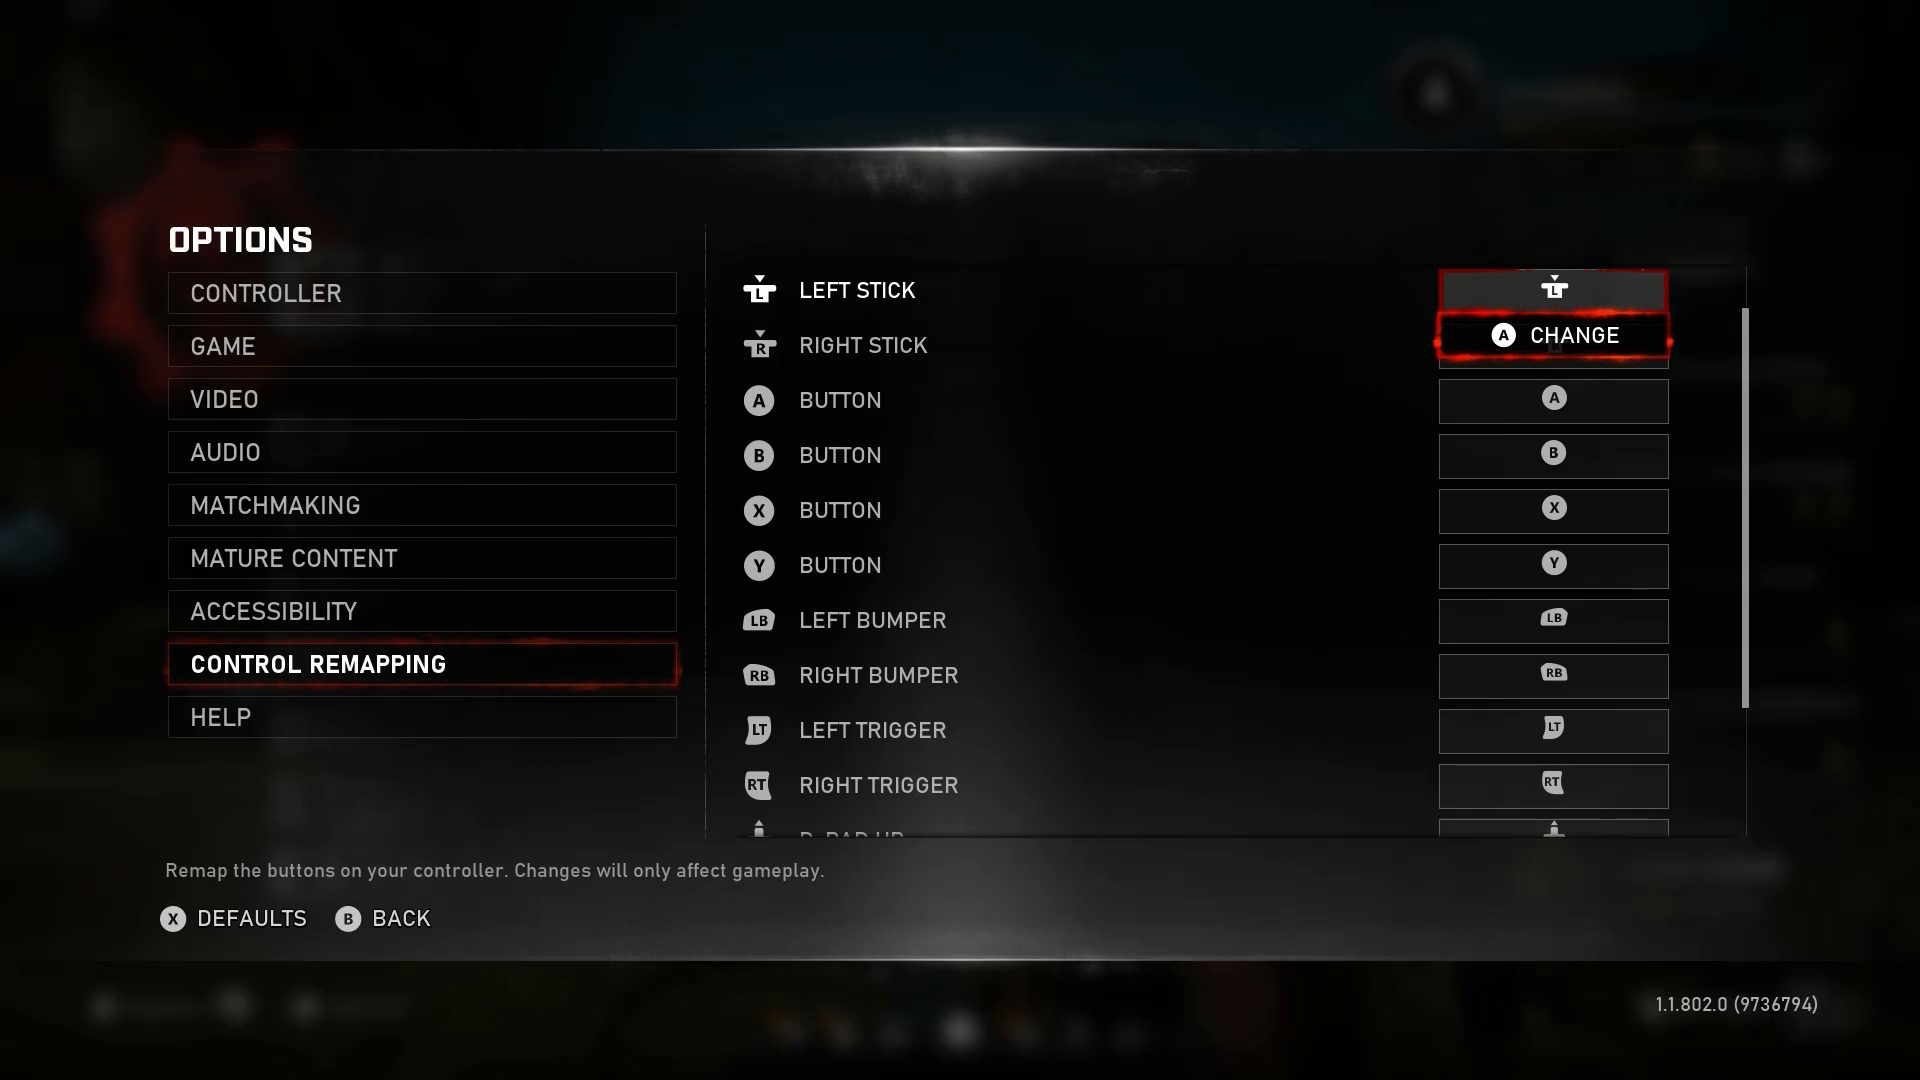 A screenshot of the Control Remapping menu in Gears 5.